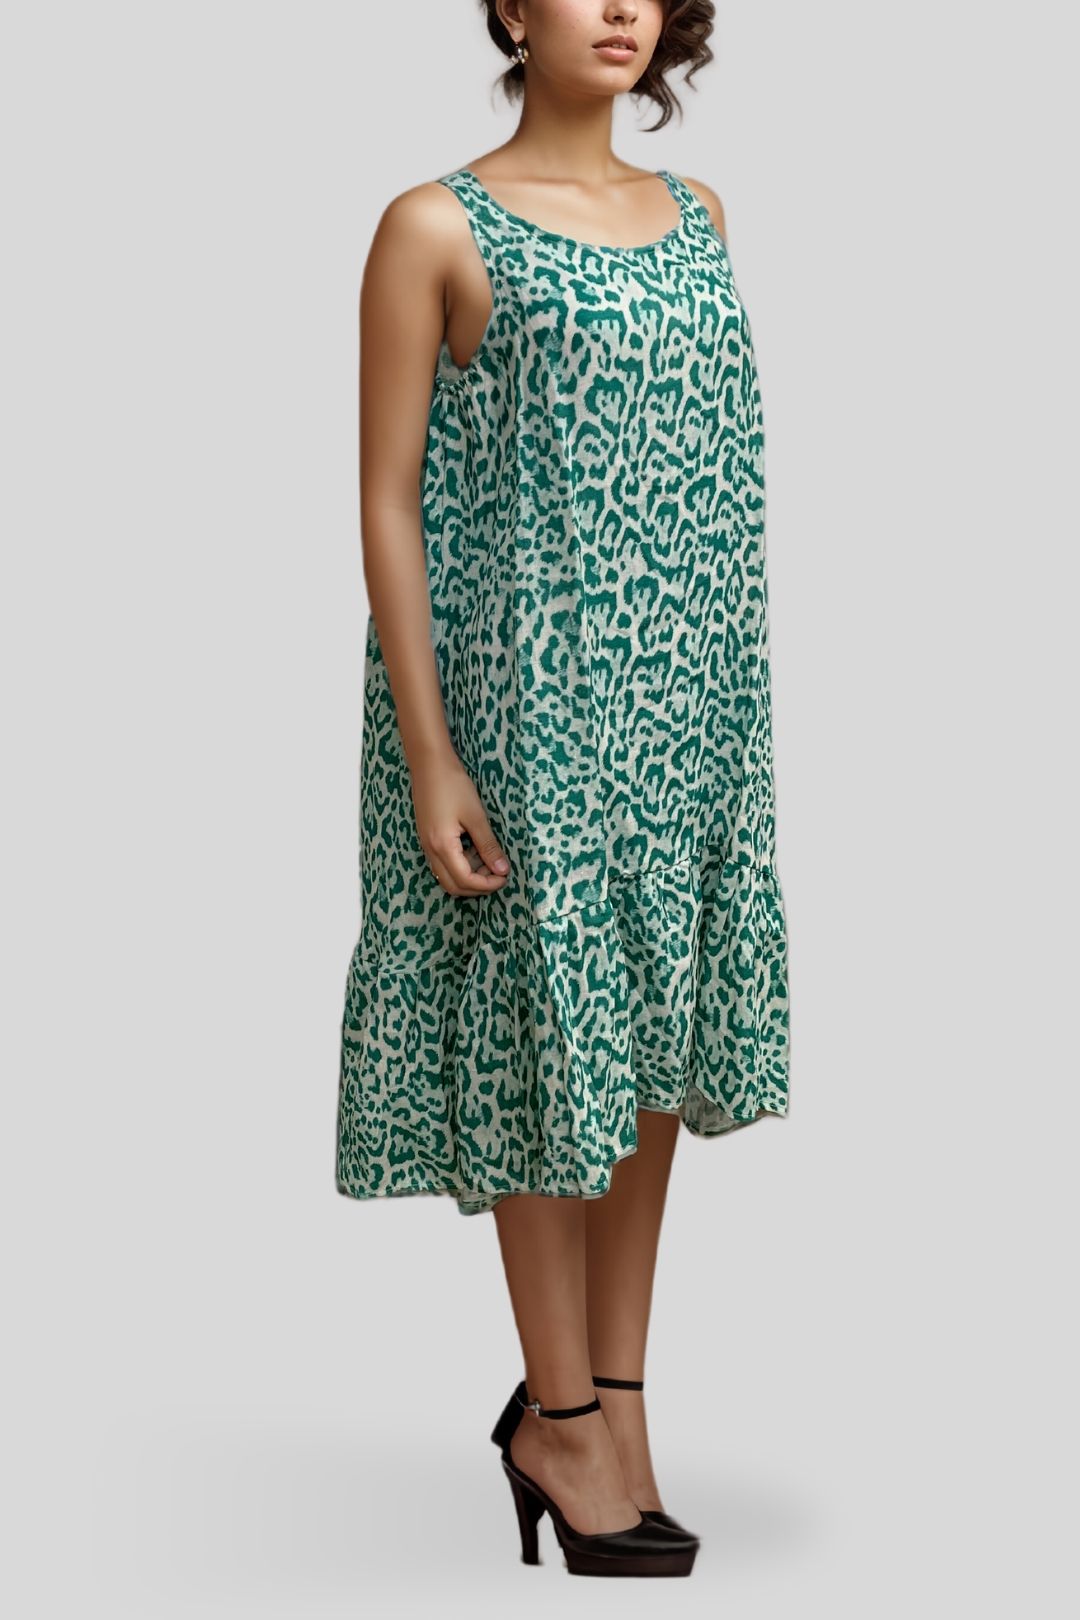 By Ridley	Abstract Print Midi Dress in Emerald Side